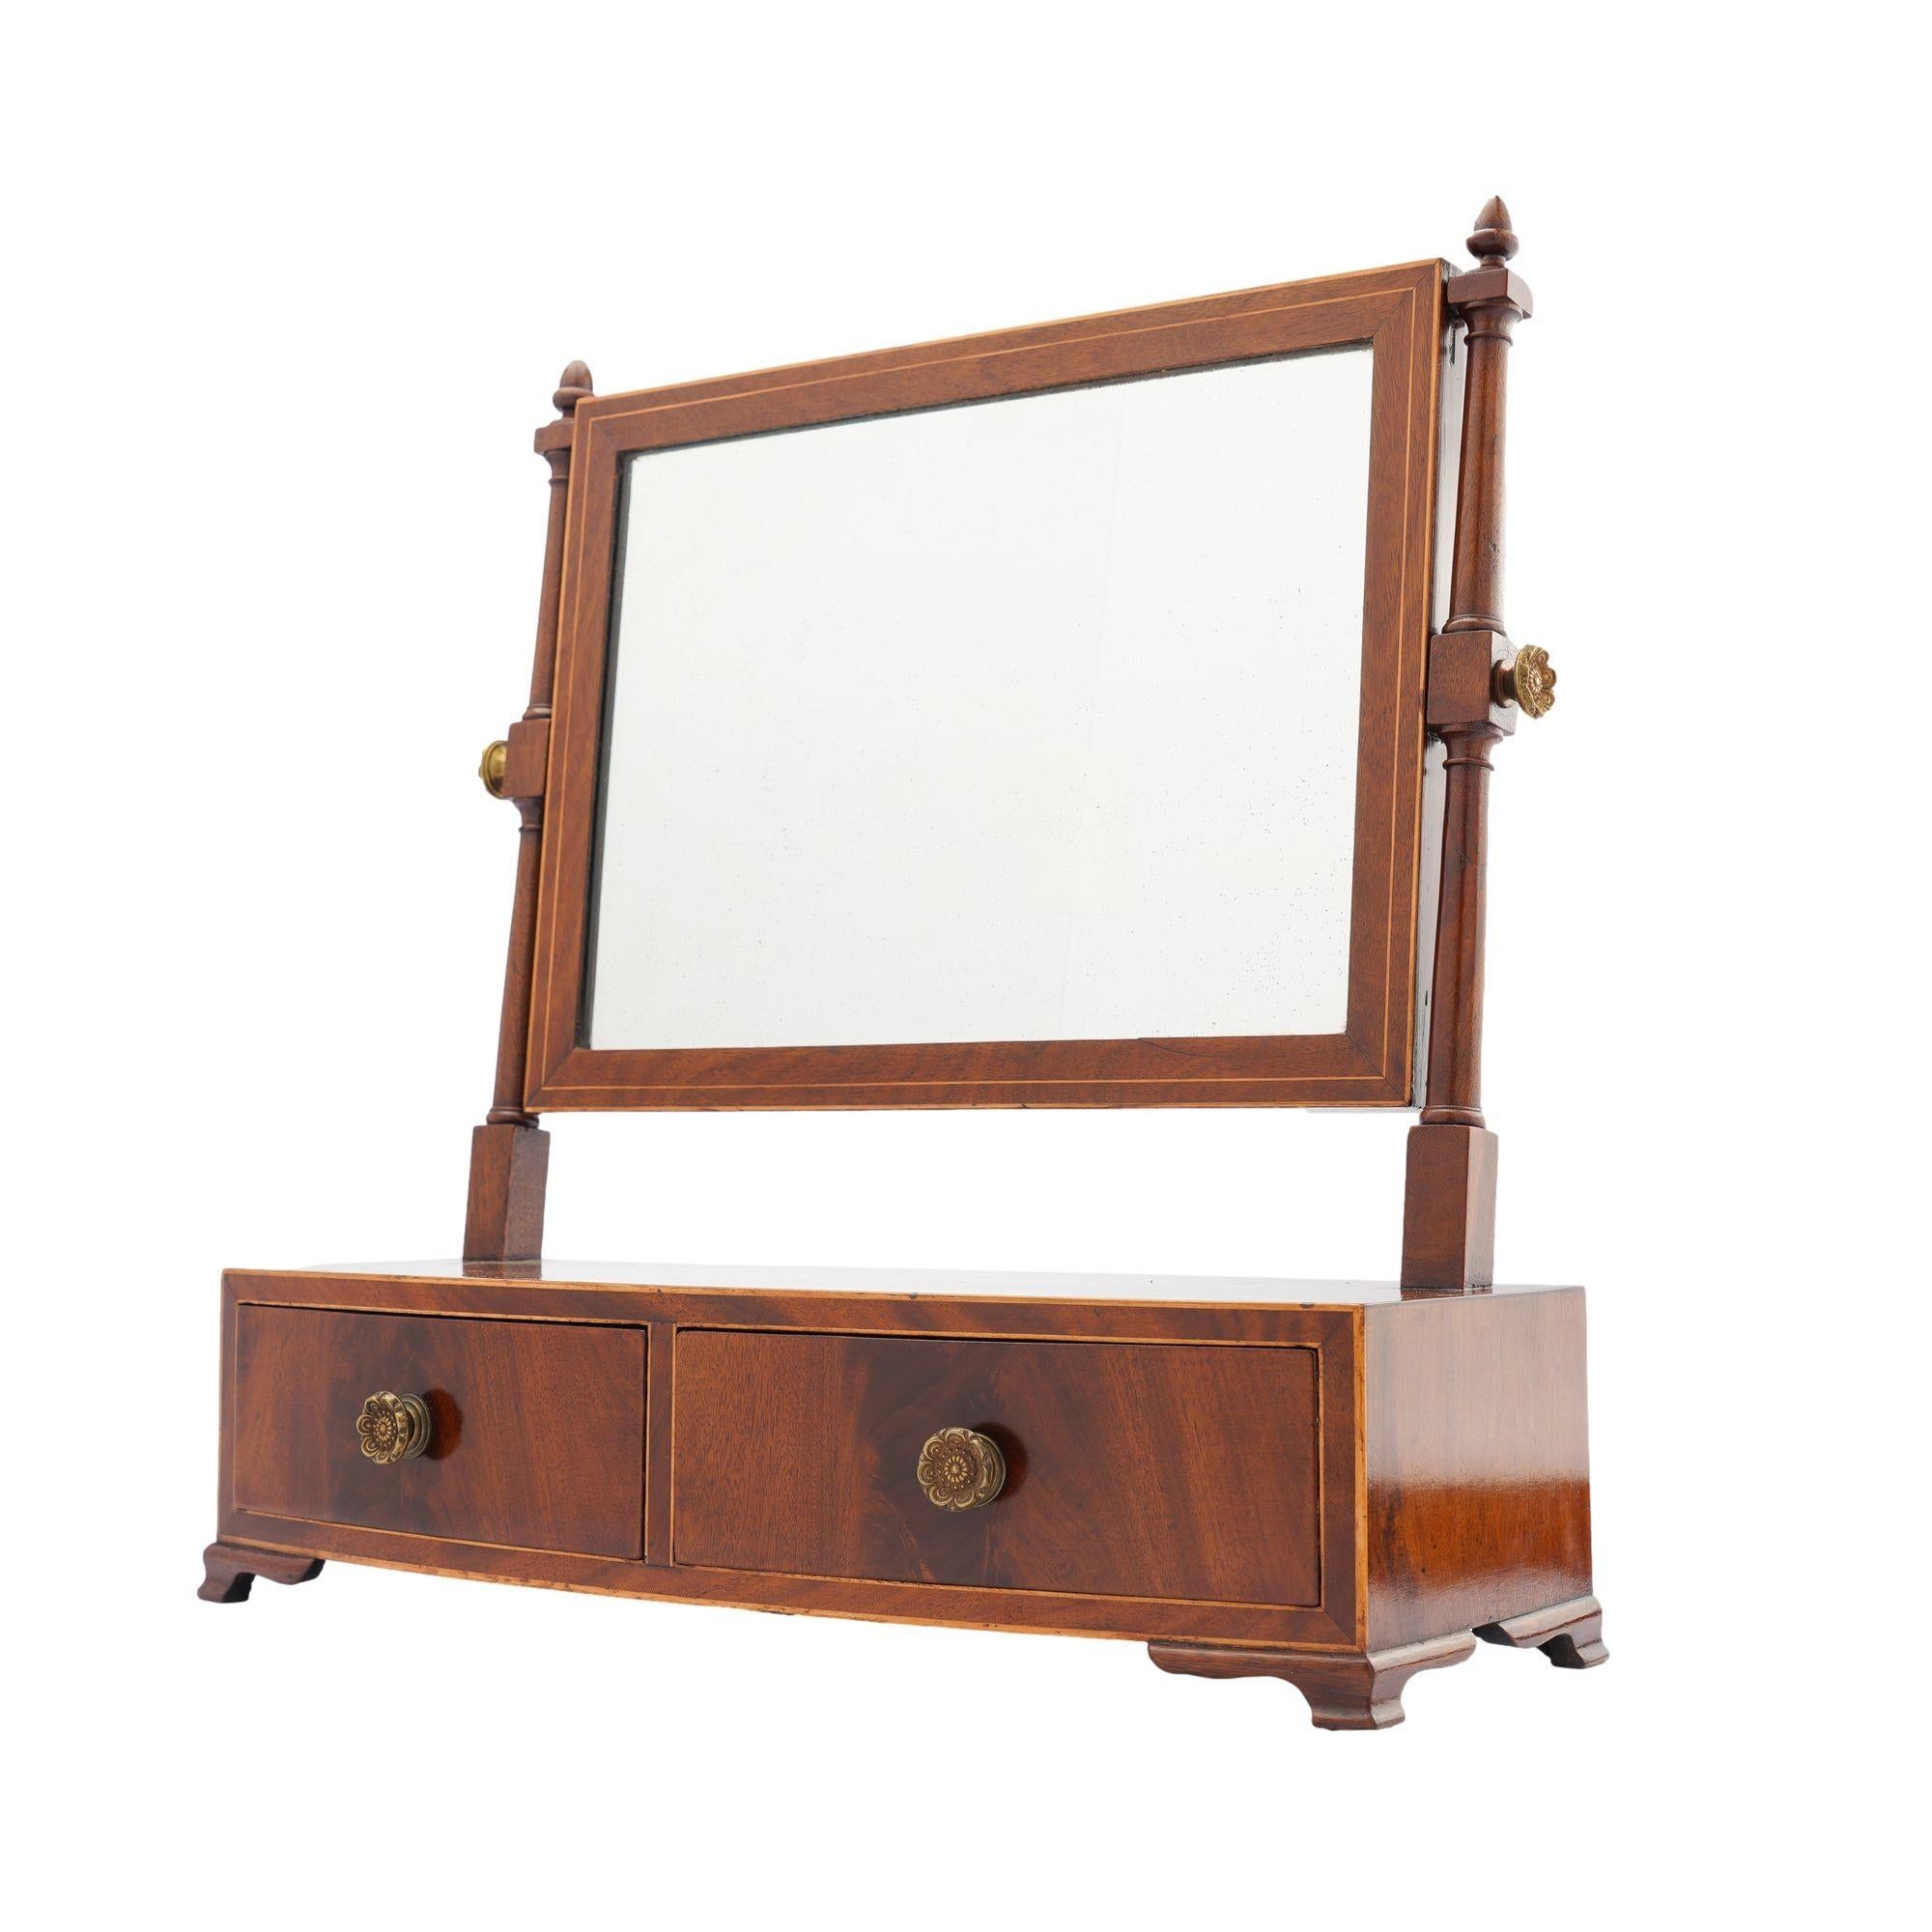 Rectangular mahogany swinger dressing mirror on a bow front stand fitted with a divided drawer. The mirror and stand are inlaid with holly stringing, and the case rests on ogee bracket feet. The drawers are fitted with a single stamped brass rosette